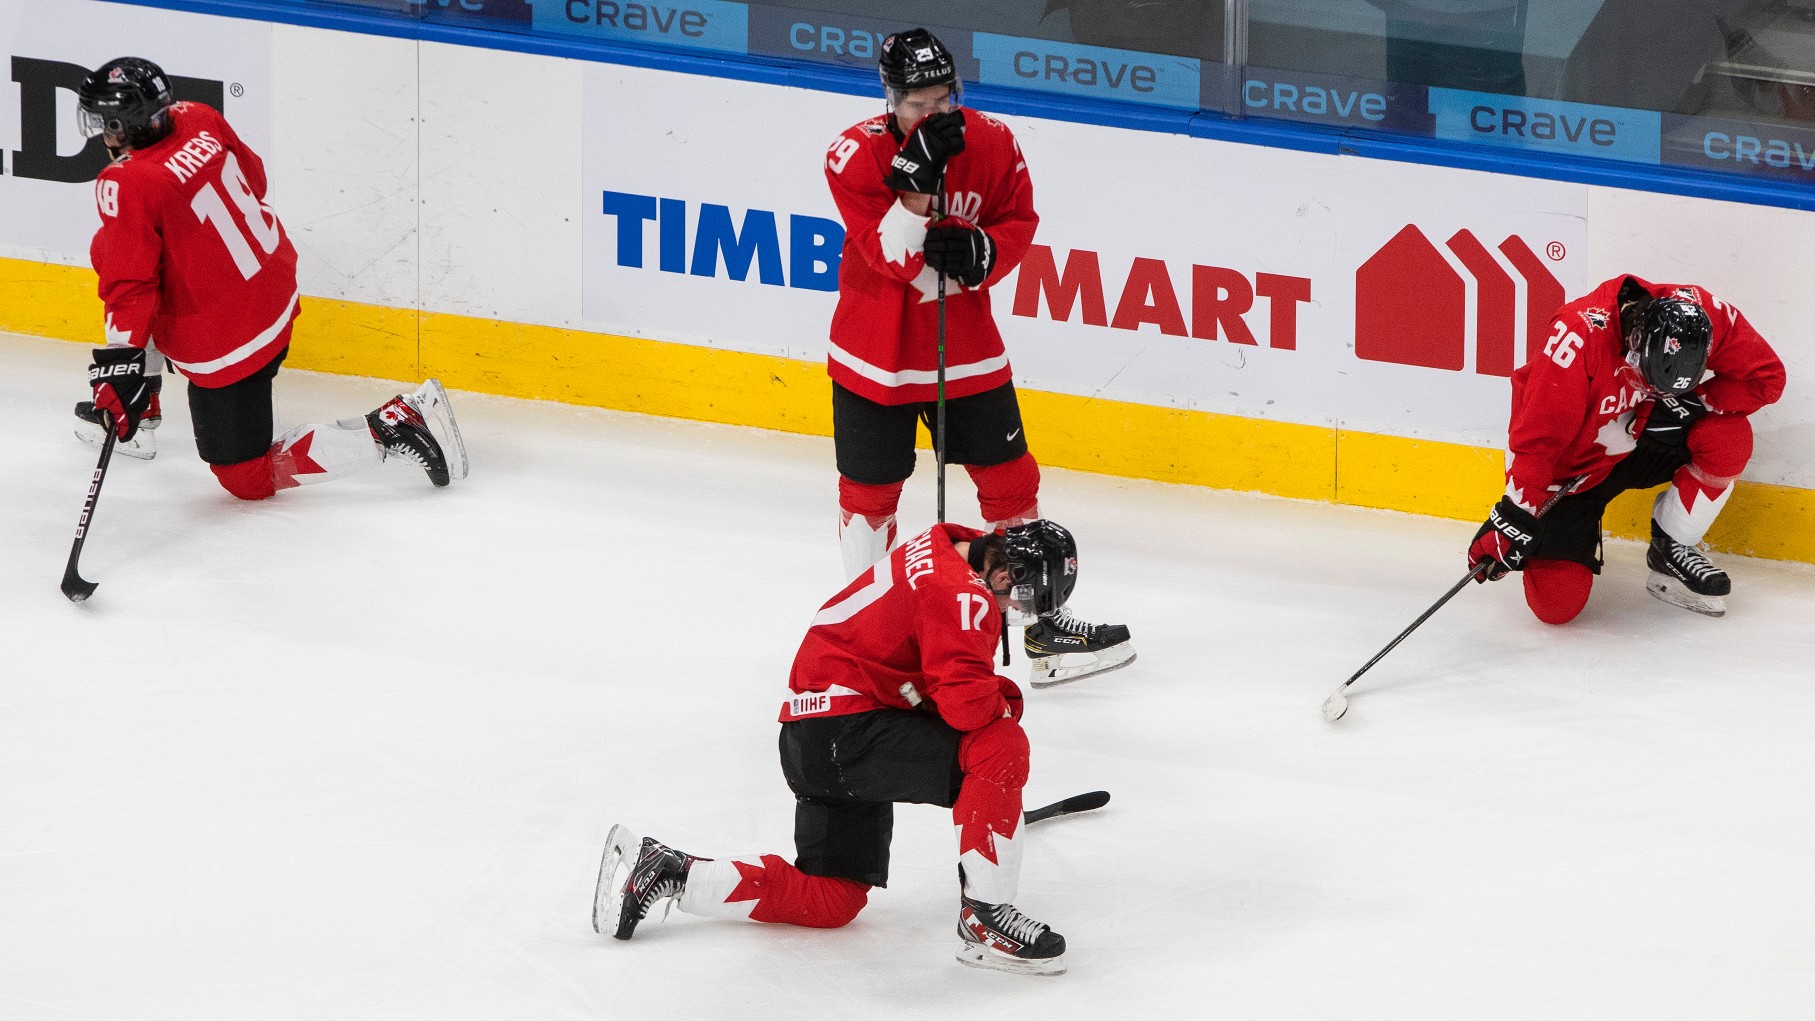 Faced with first genuine test of 2021 world juniors, Canada falls short